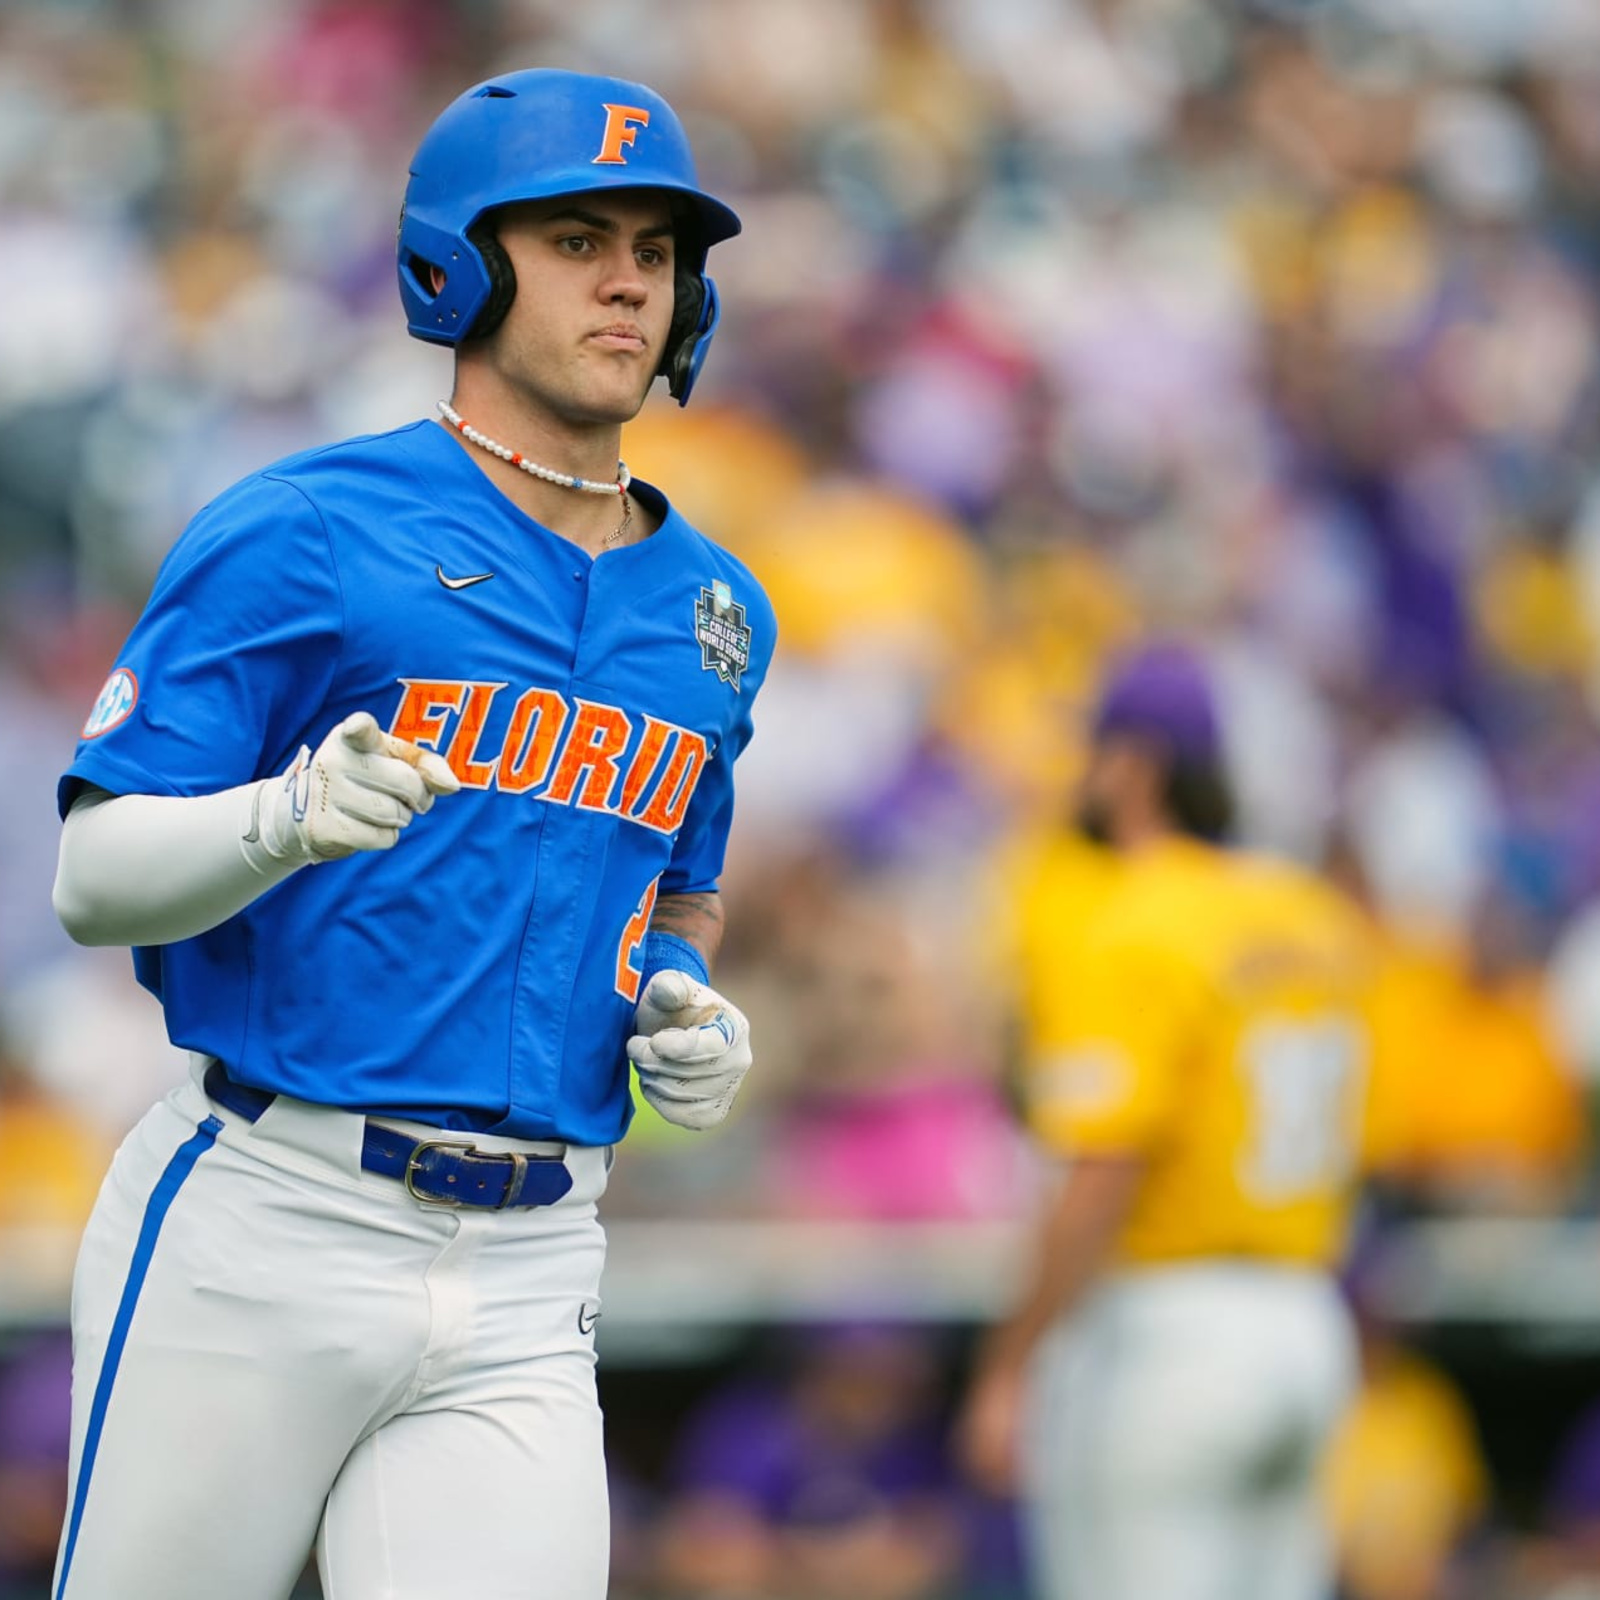 Florida sets College World Series record for runs with 24-4 win